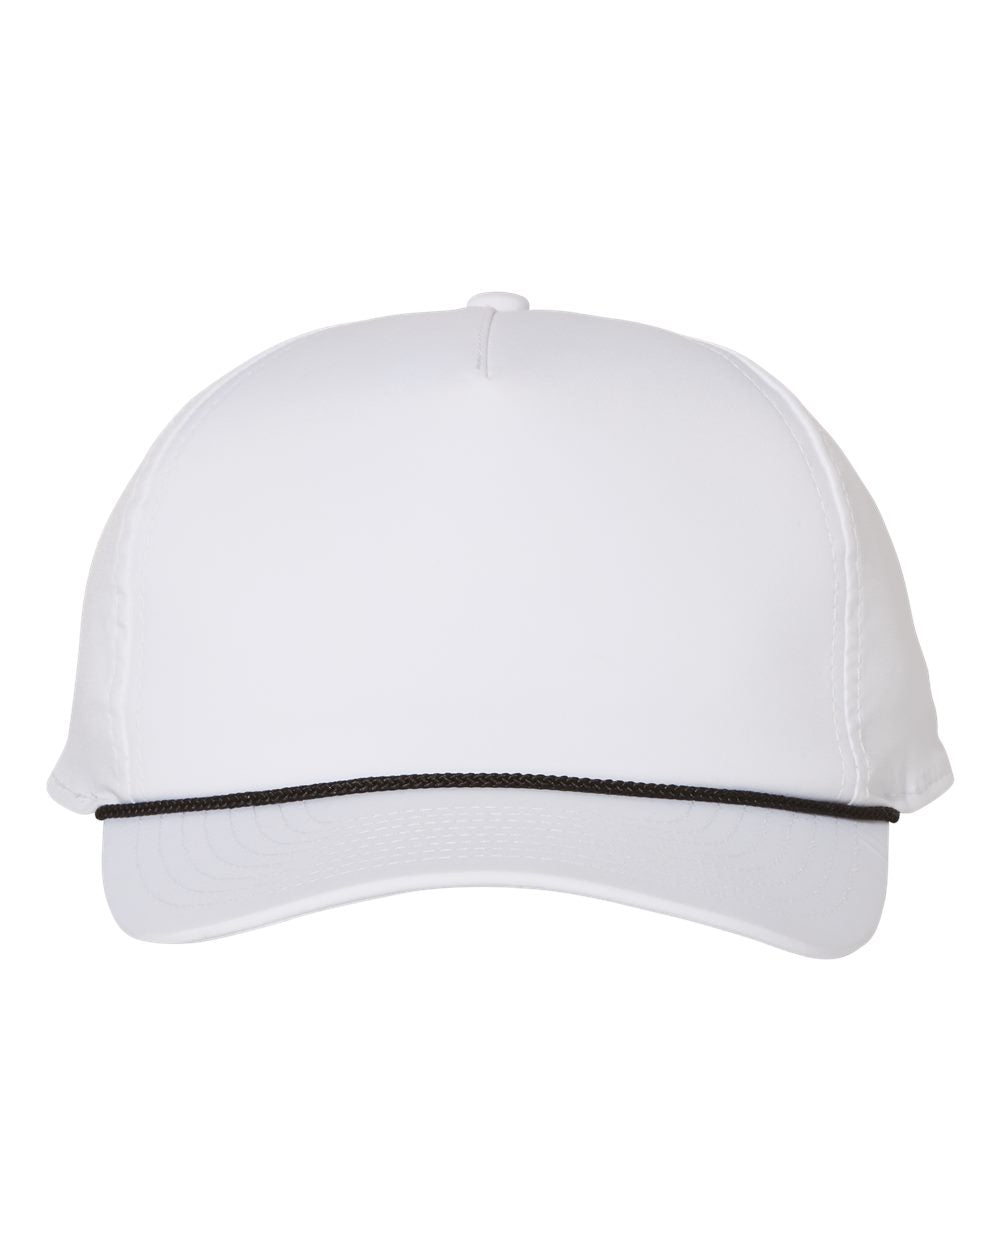 Imperial True Fit 5054 - The Wrightson Cap